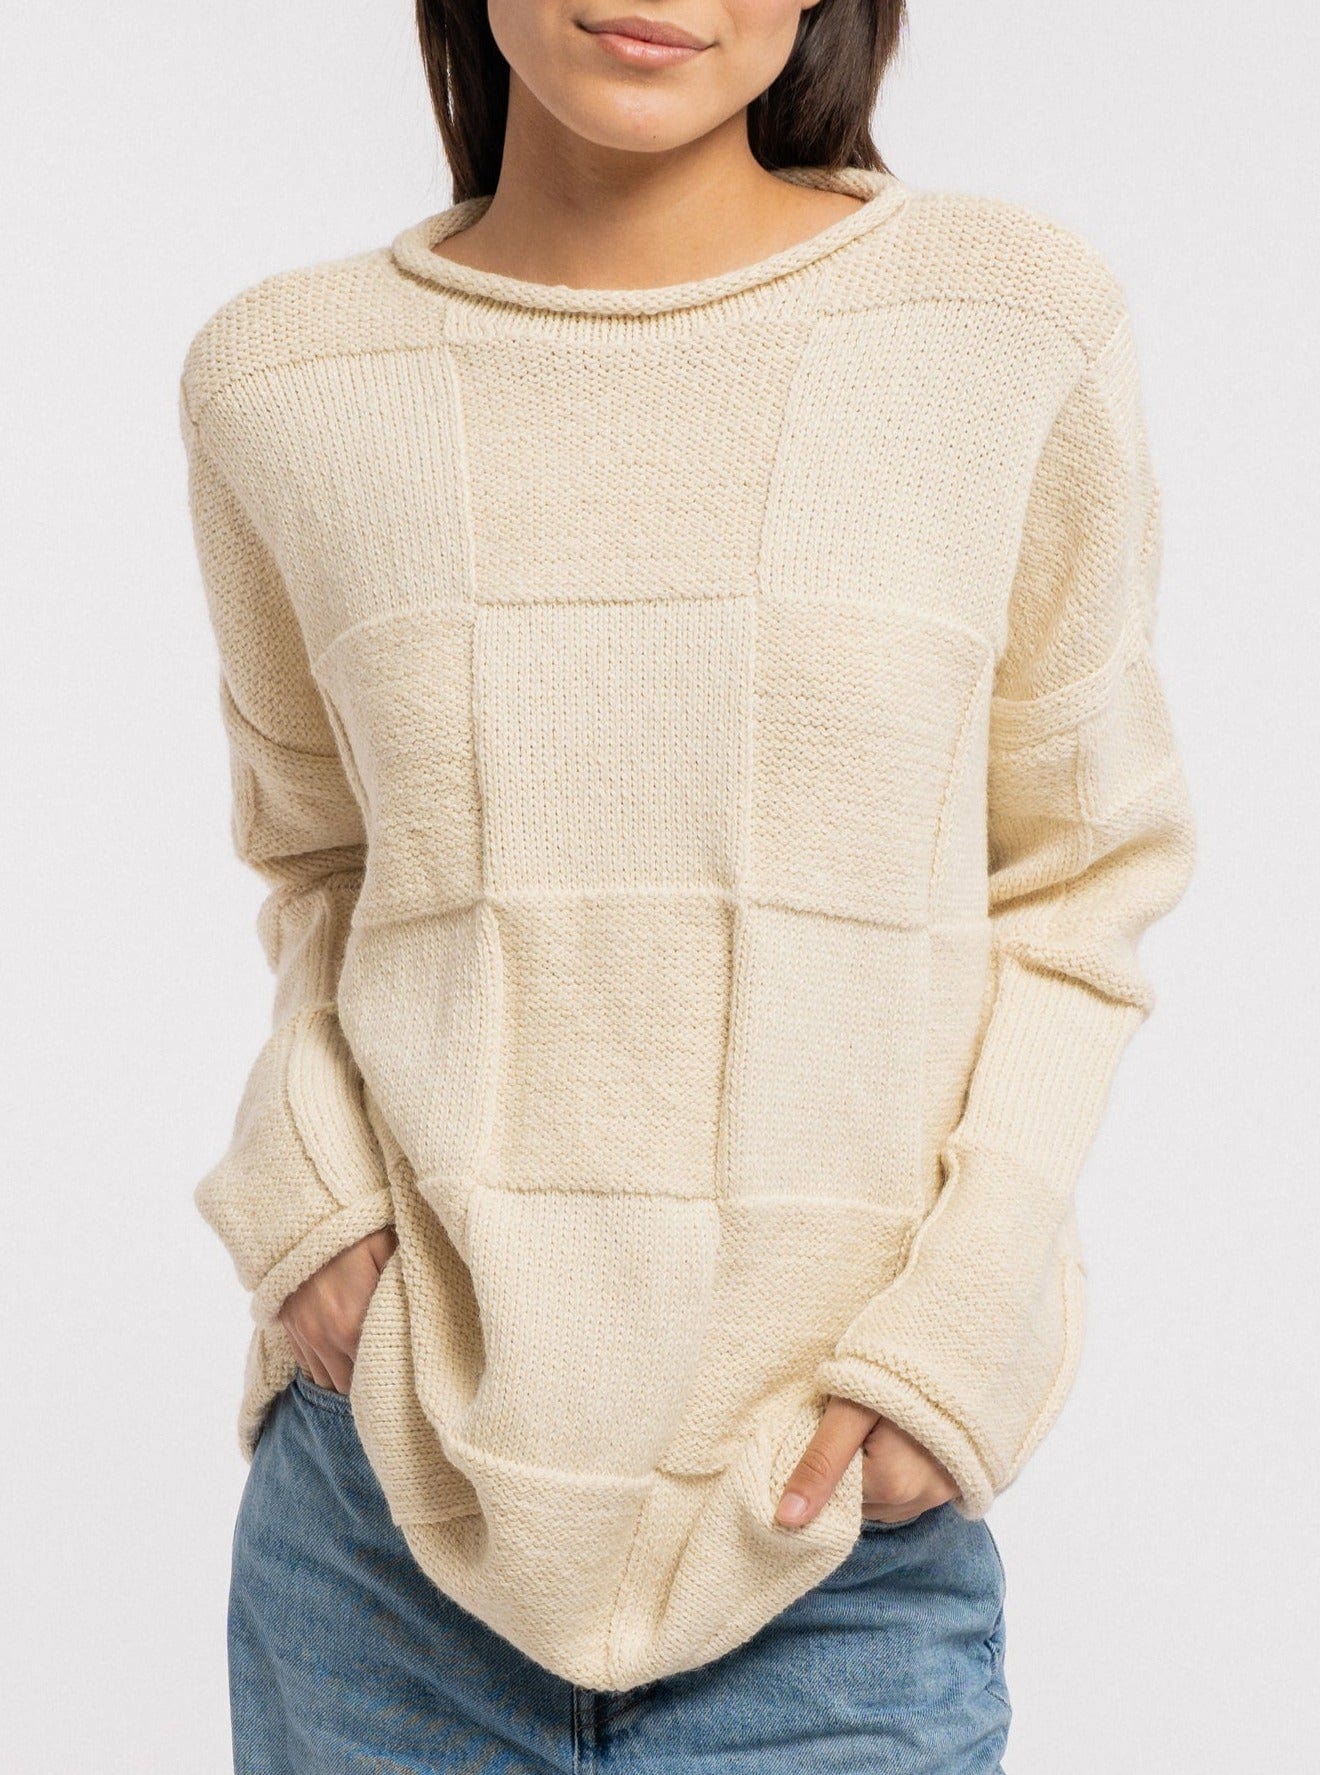 A cozy model wearing the Heritage Basketweave Sweater - Ivory.